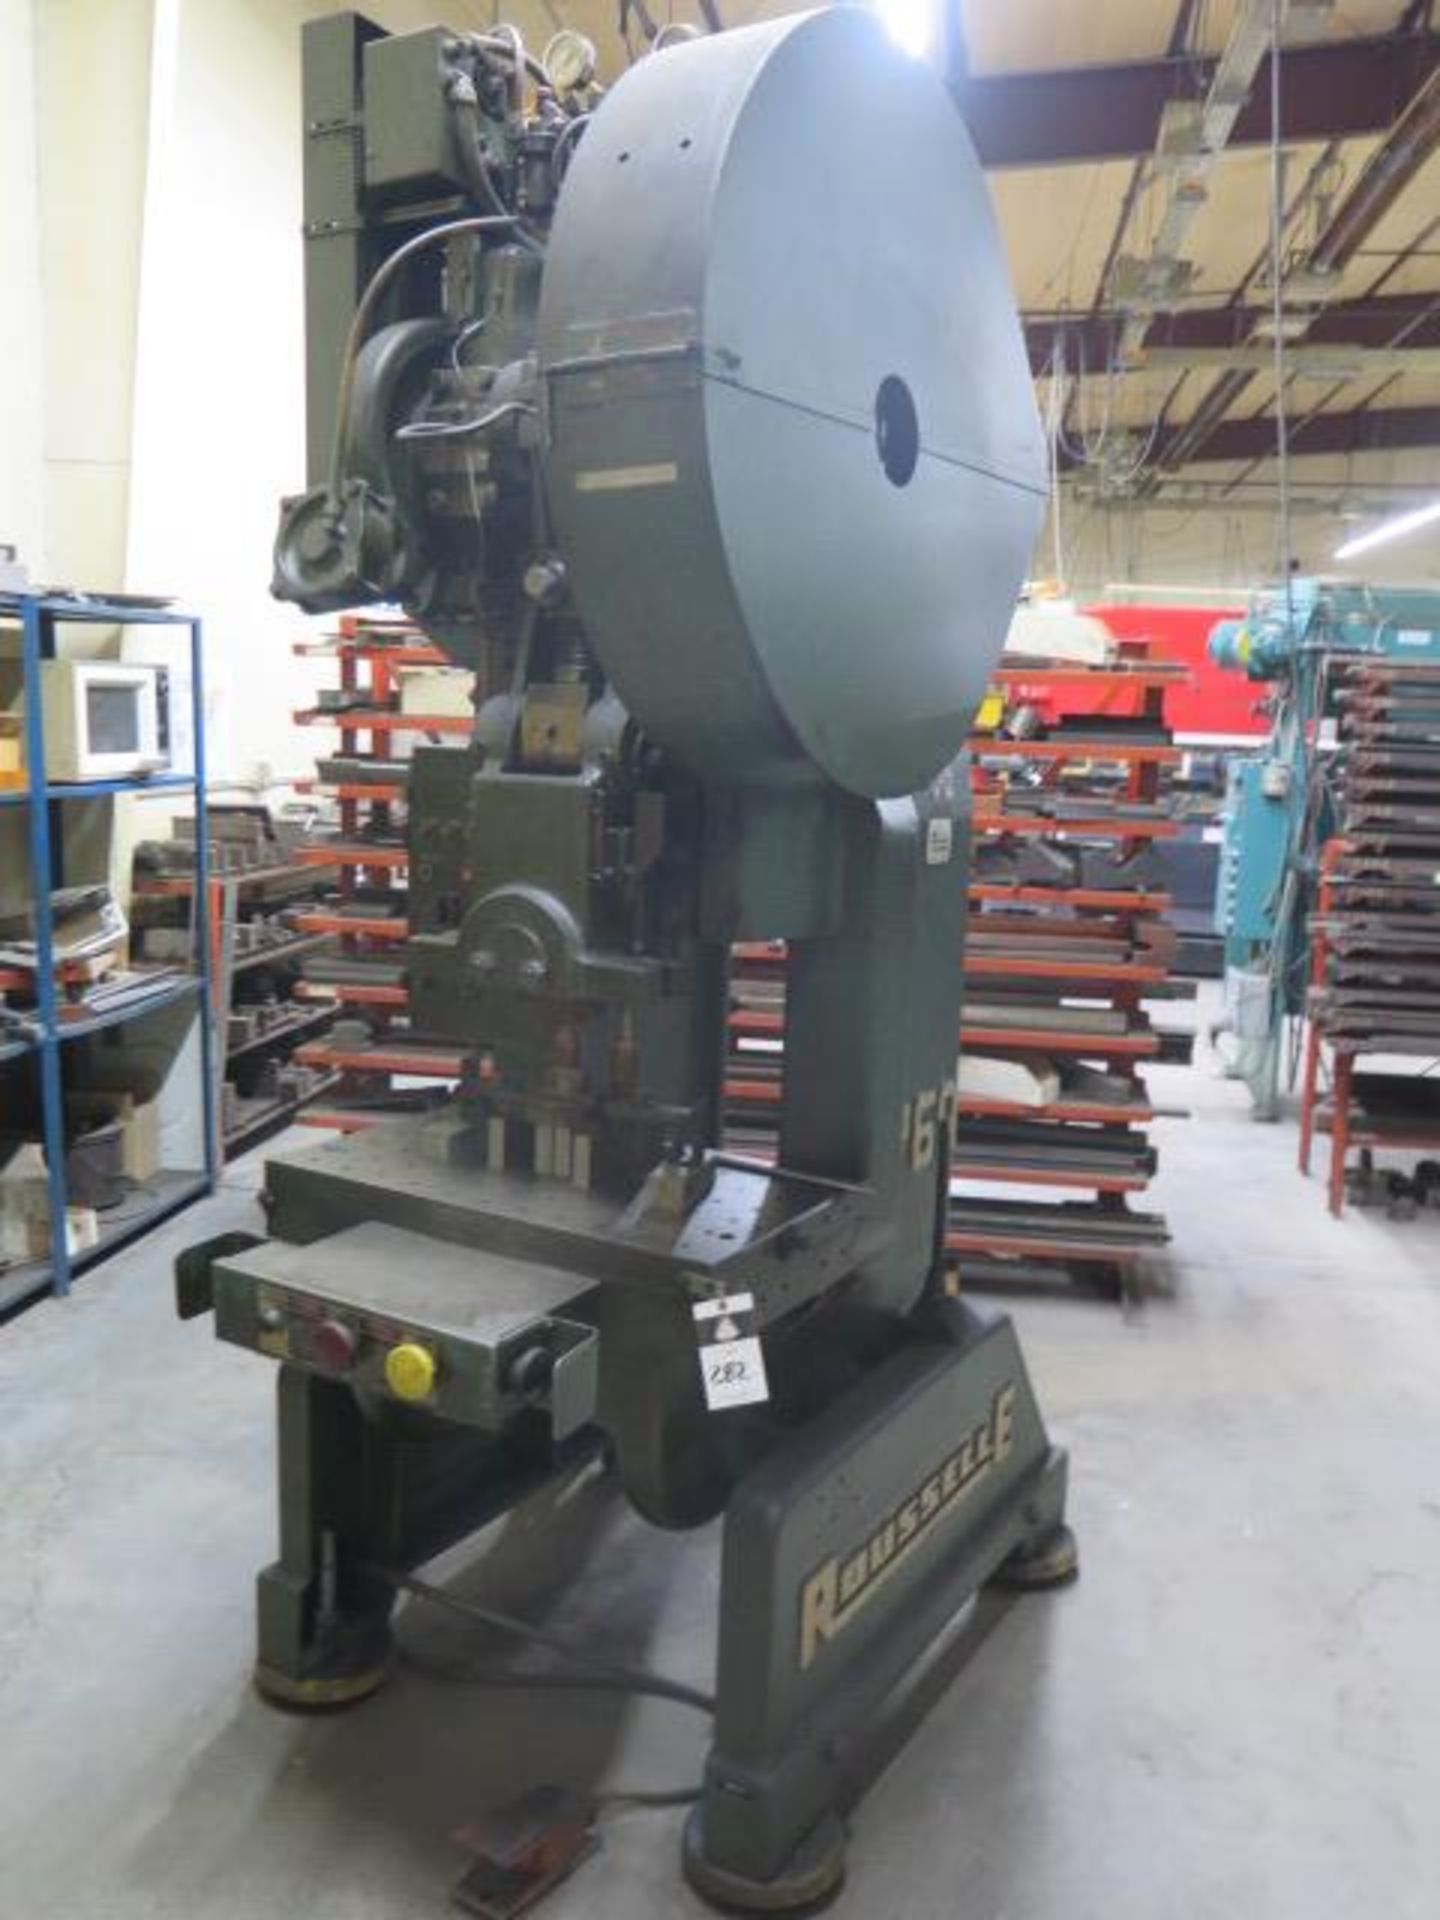 Rousselle No. 6A 60 Ton OBI Stamping Press SOLD AS PARTS ONLY, SOLD AS IS - NO WARRANTY - Image 2 of 11